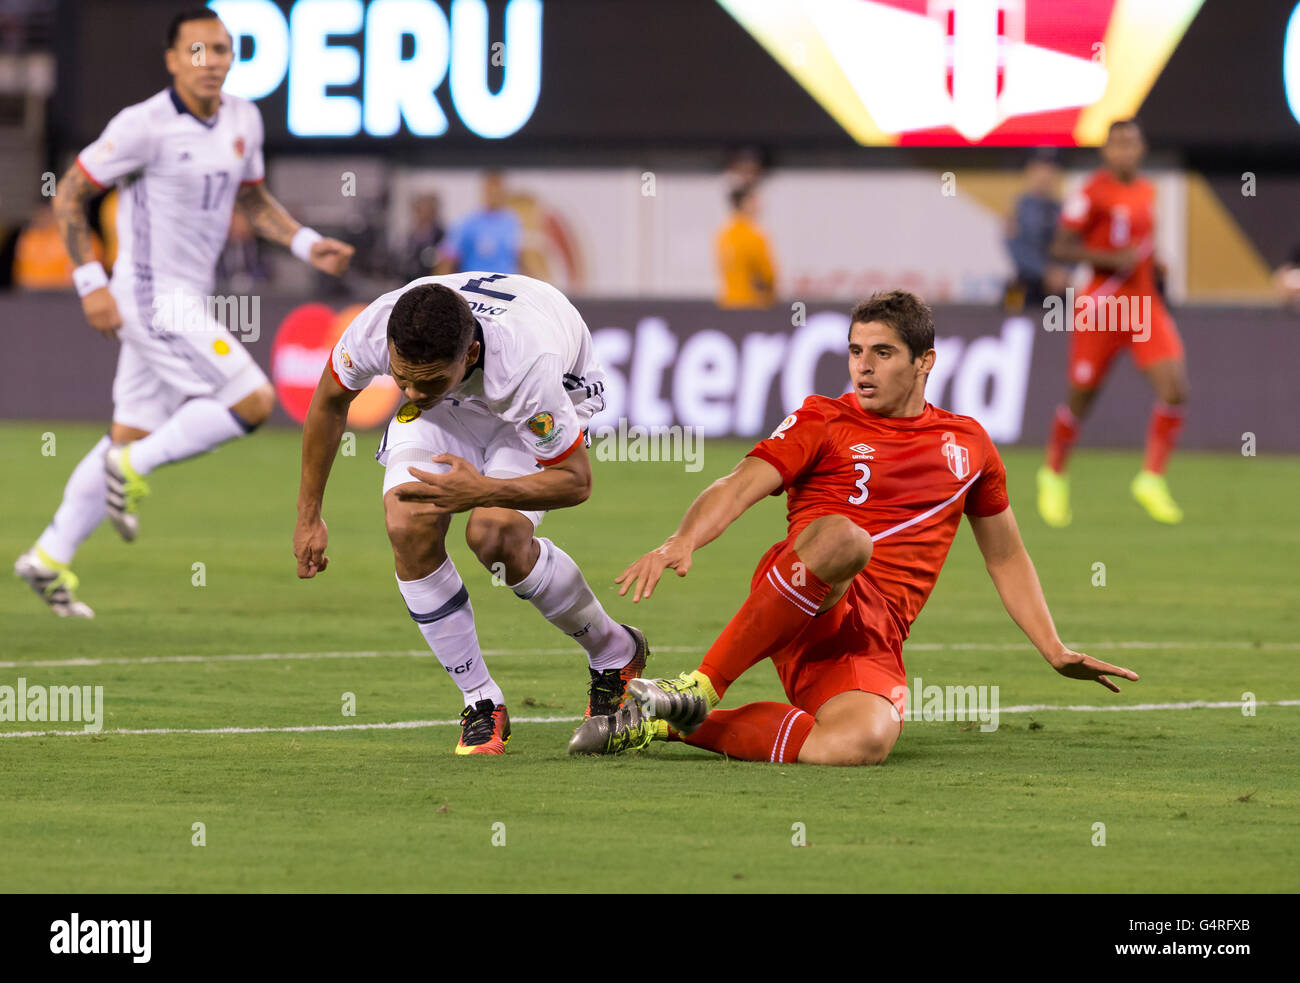 East Rutherford, NJ USA - June 17, 2016: Carlos Bacca (7) of Columbia & Aldo Corzo (3) of Peru collide  during quaterfinal game between Columbia & Peru. Columbia won 0 (4) - 0 (2) by penalty kick Stock Photo